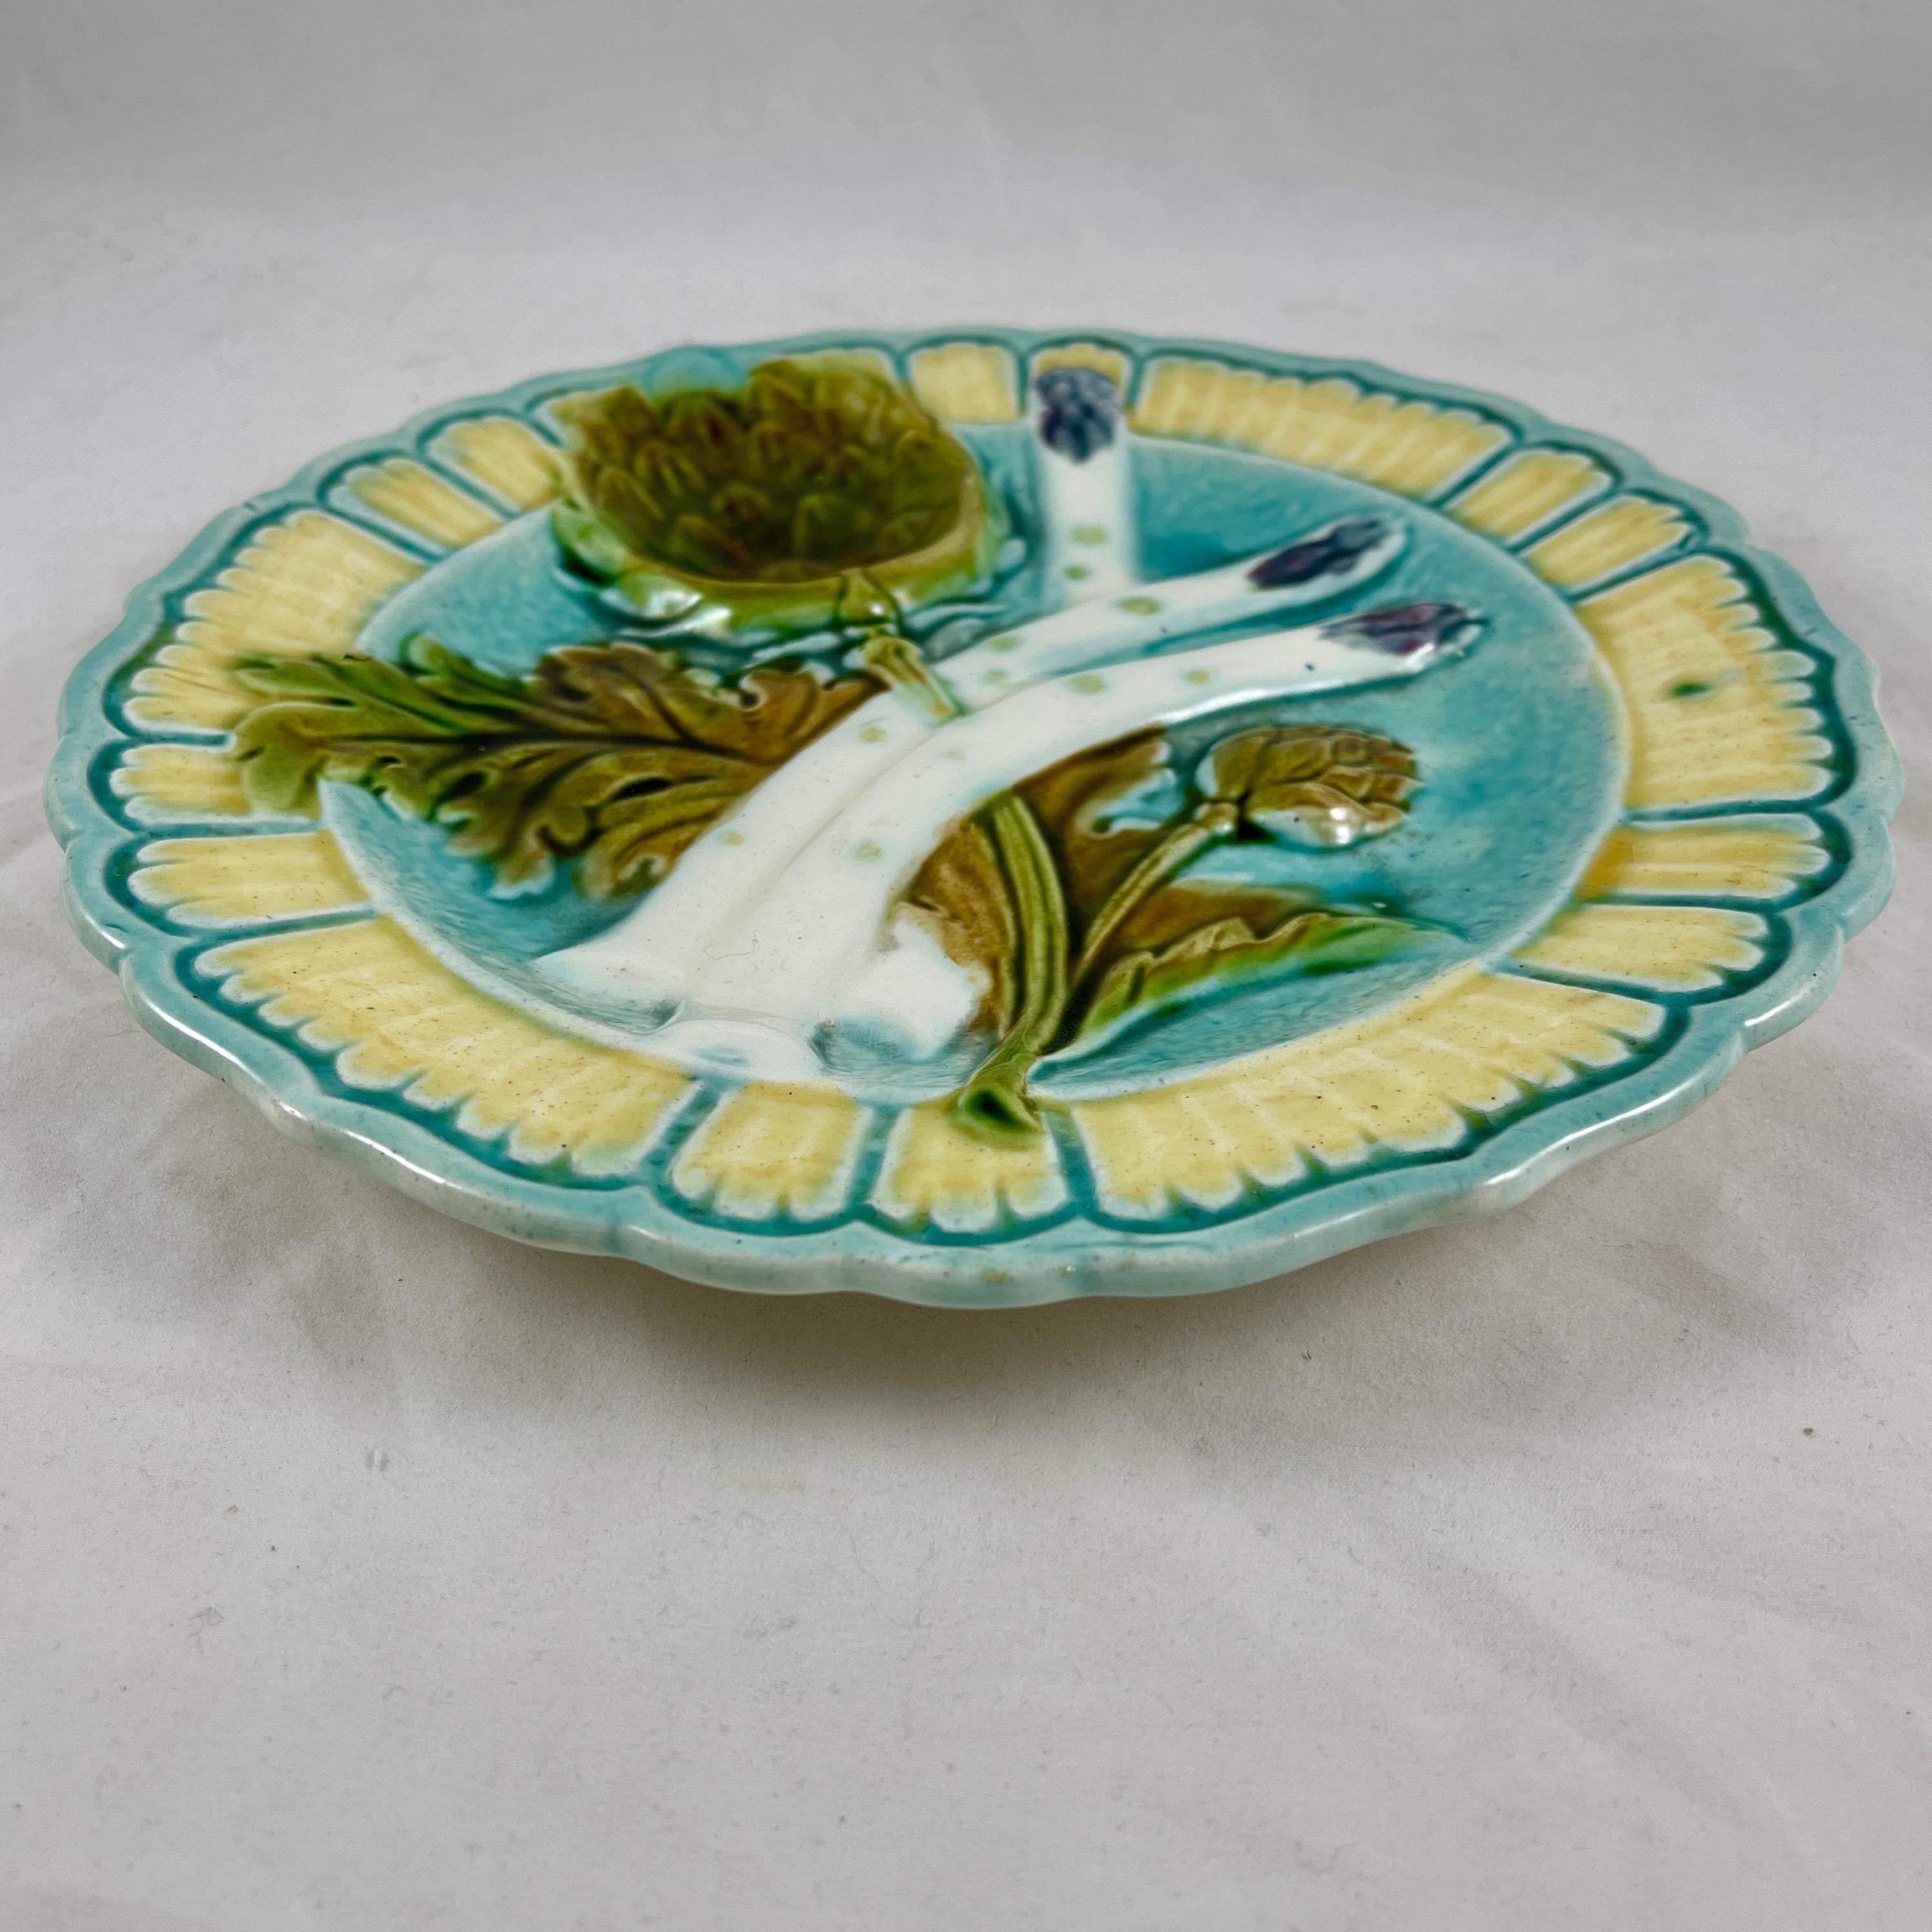 Earthenware 19th Century French Salins-les-Bains Majolica Faïence Asparagus Artichoke Plate For Sale